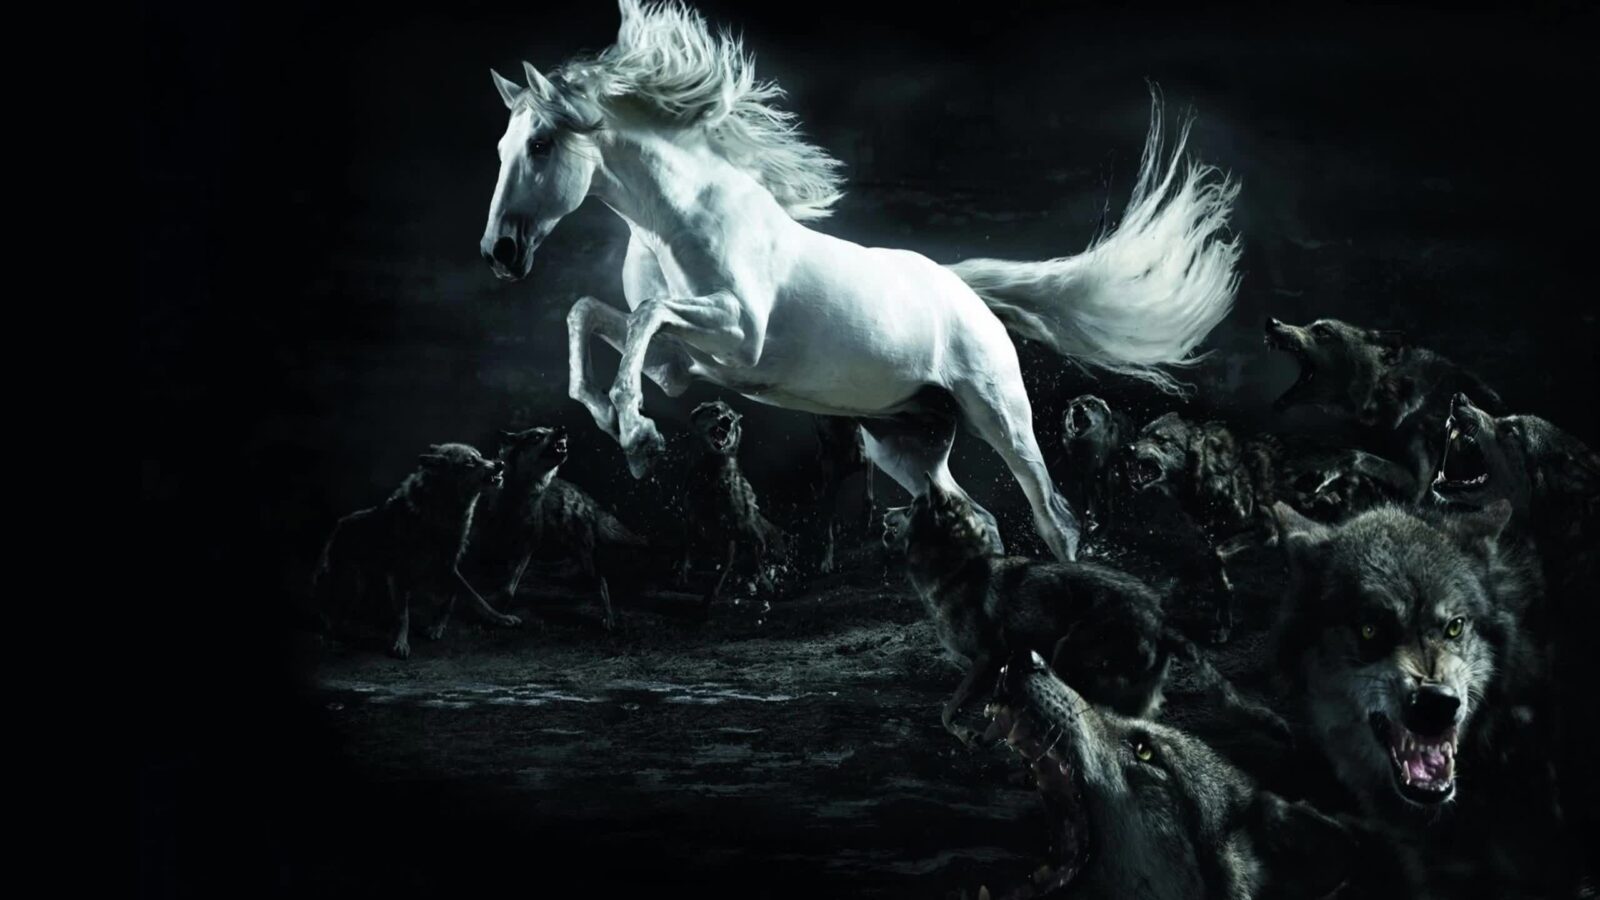 LiveWallpapers4Free.com | Fantasy Battle White Horse And Wolves 2K - Free Live Wallpaper